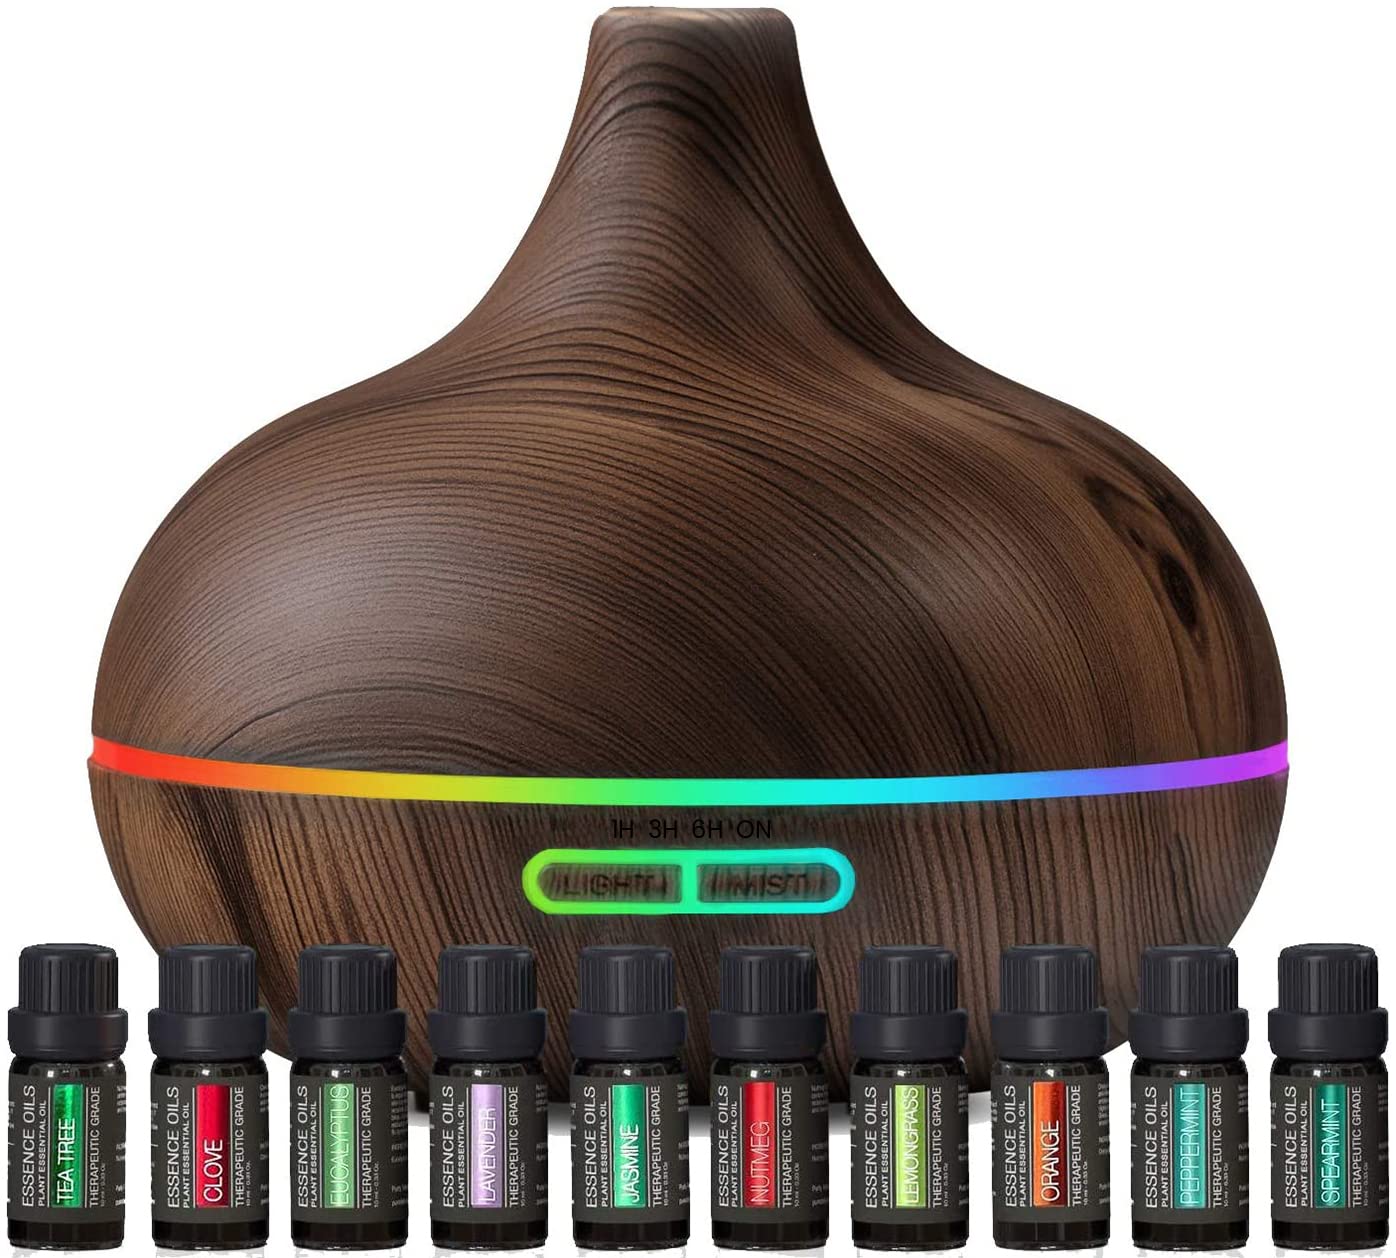 Ultimate Aromatherapy Diffuser & Essential Oil Set - Ultrasonic Diffuser & Top 10 Essential Oils - 300ml Diffuser with 4 Timer & 7 Ambient Light Settings - Therapeutic Grade Essential Oils Dark Oak